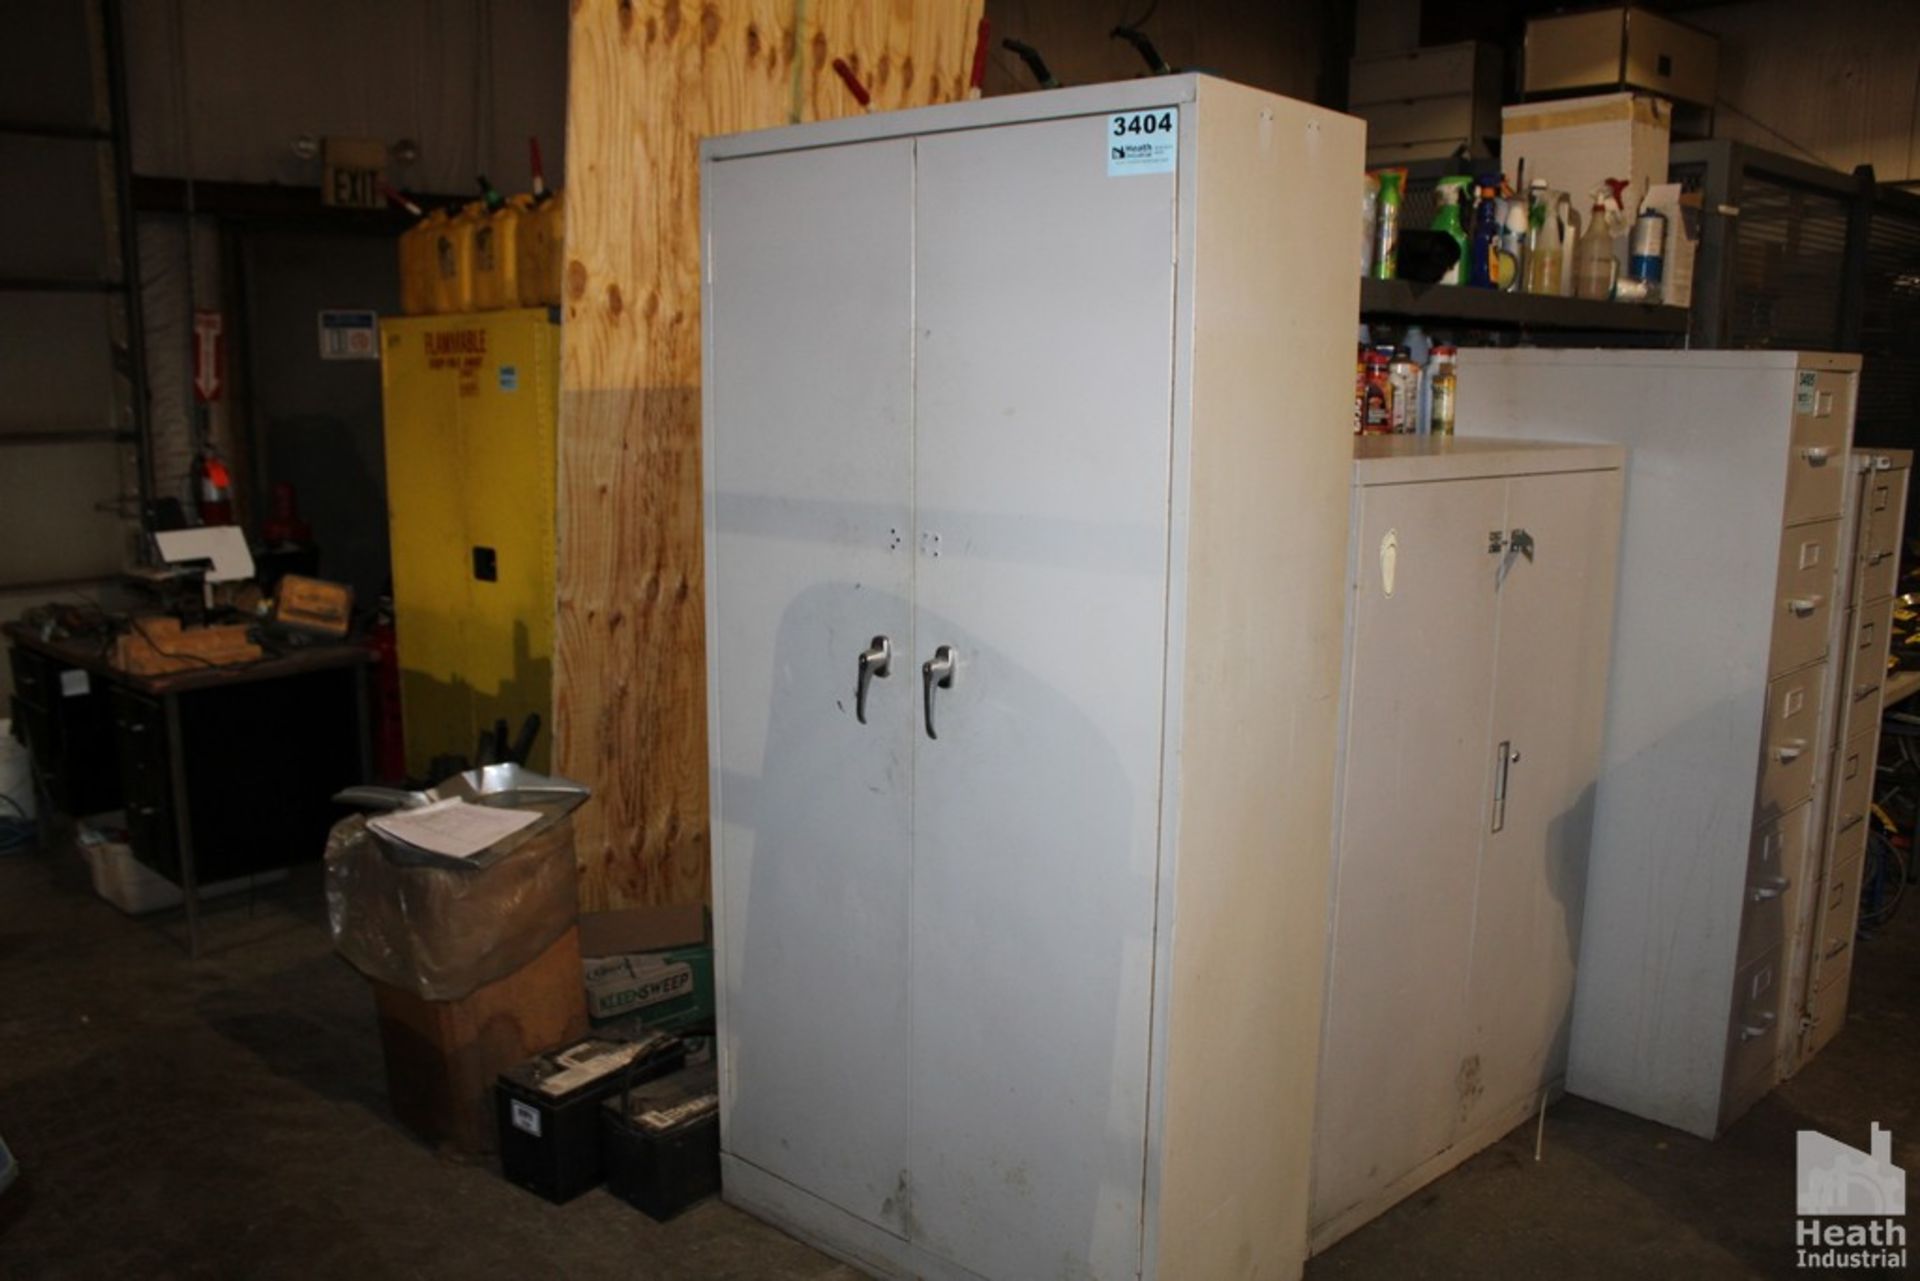 (2) TWO DOOR STEEL CABINETS 36" X 18" X 72" AND 36" X 18" X 53"